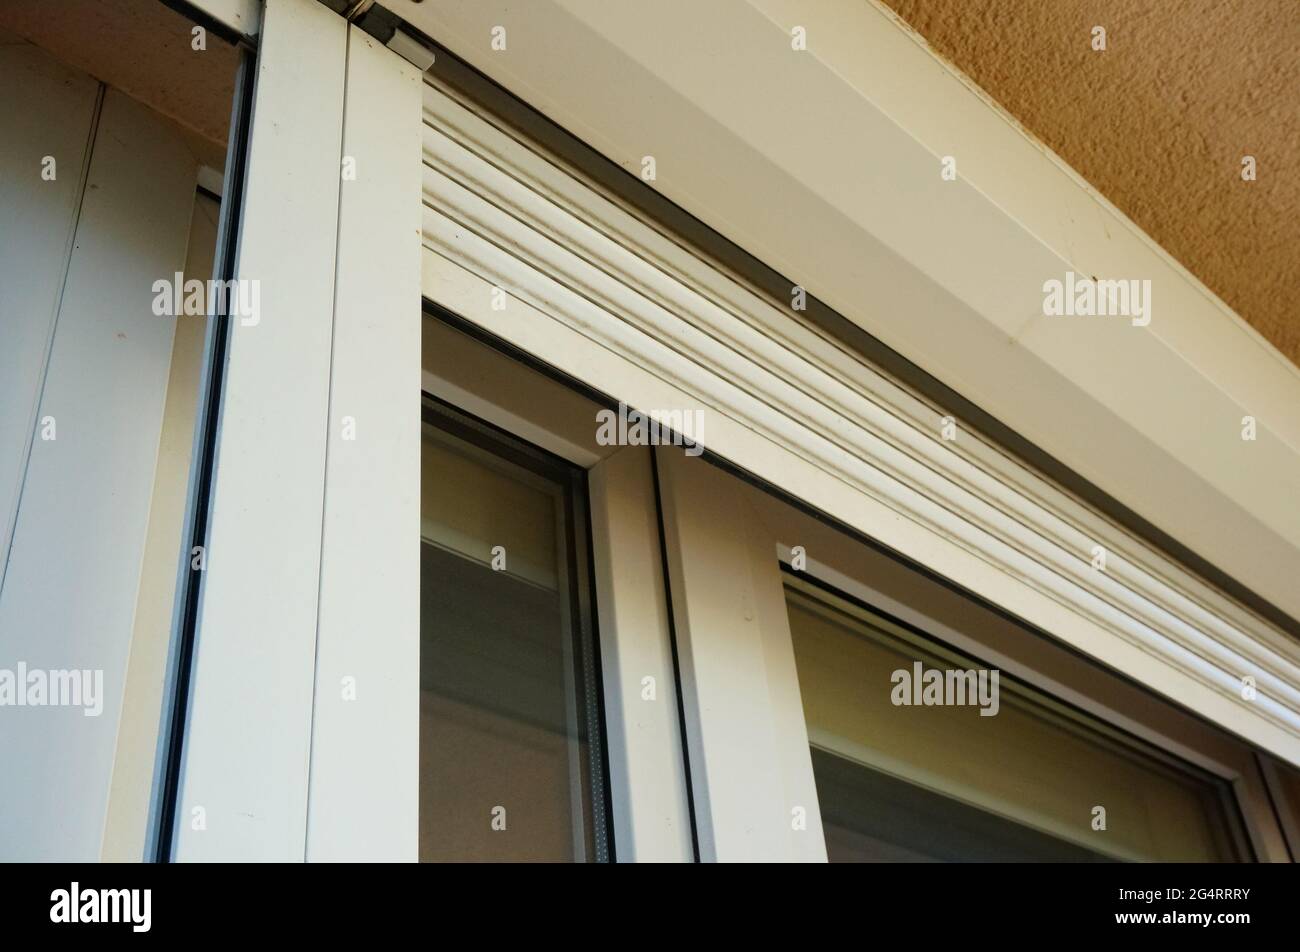 Window roll of a domestic  home Stock Photo